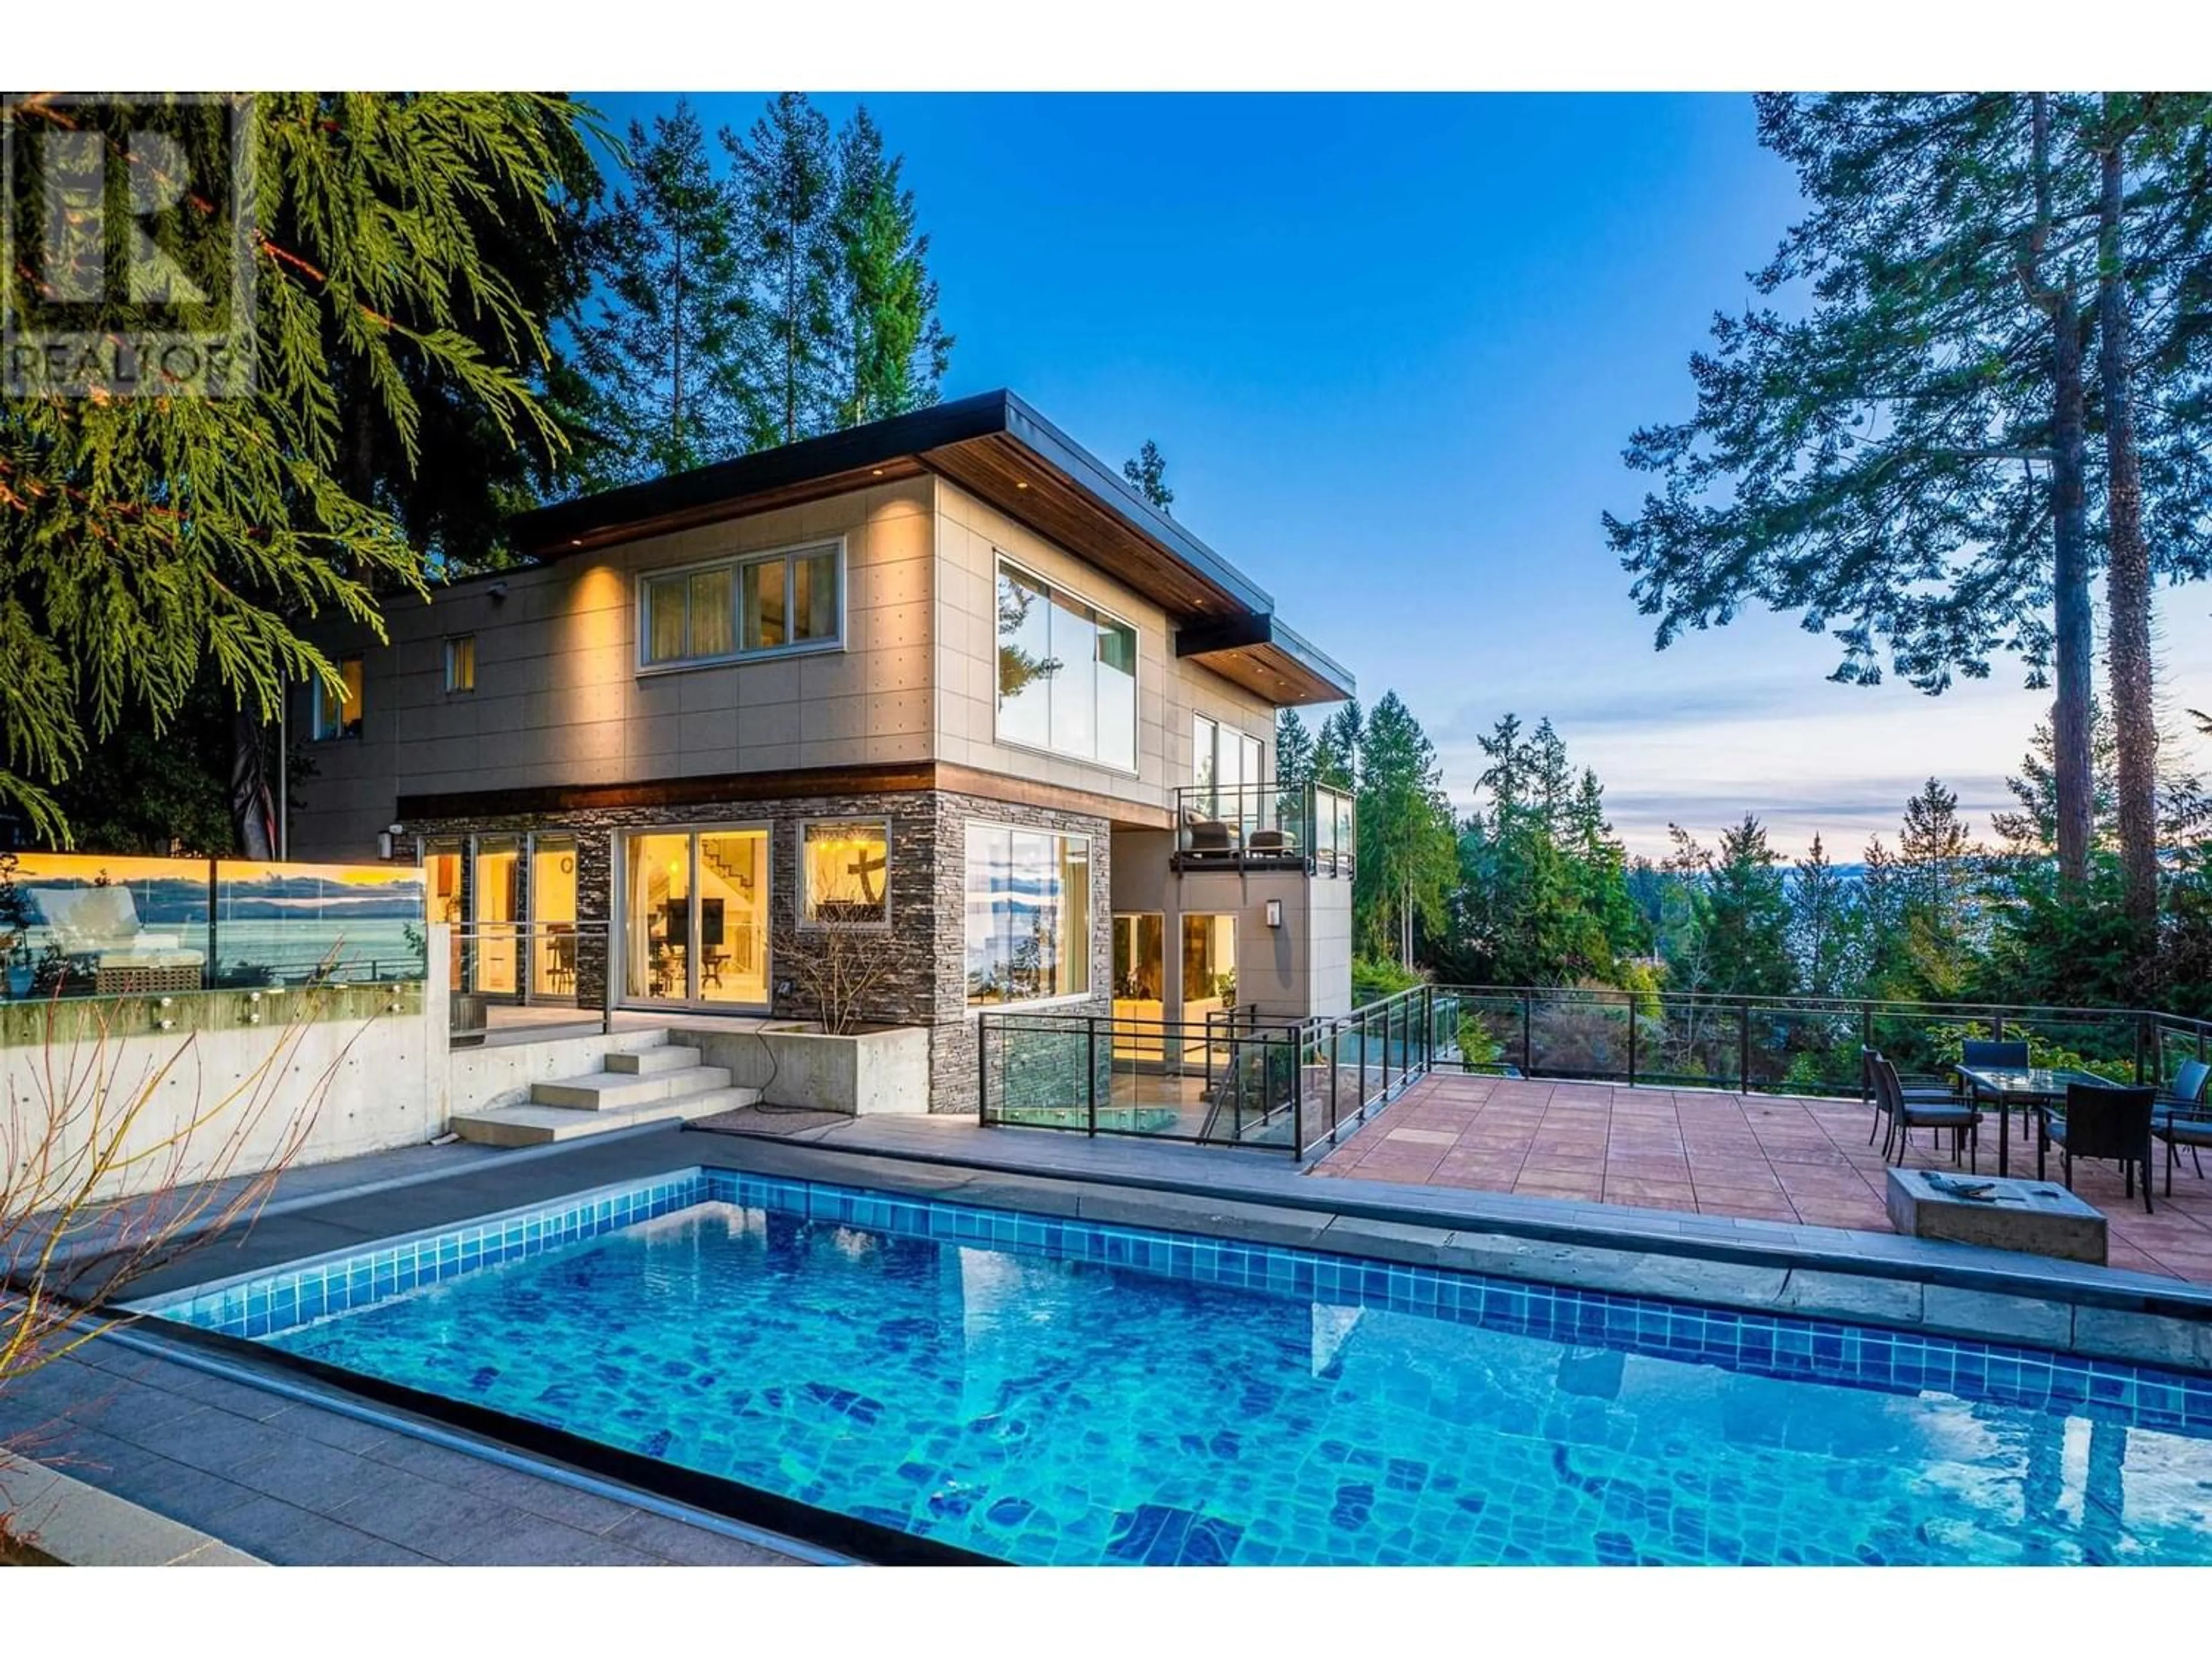 Home with brick exterior material for 5290 GULF PLACE, West Vancouver British Columbia V7W2V9